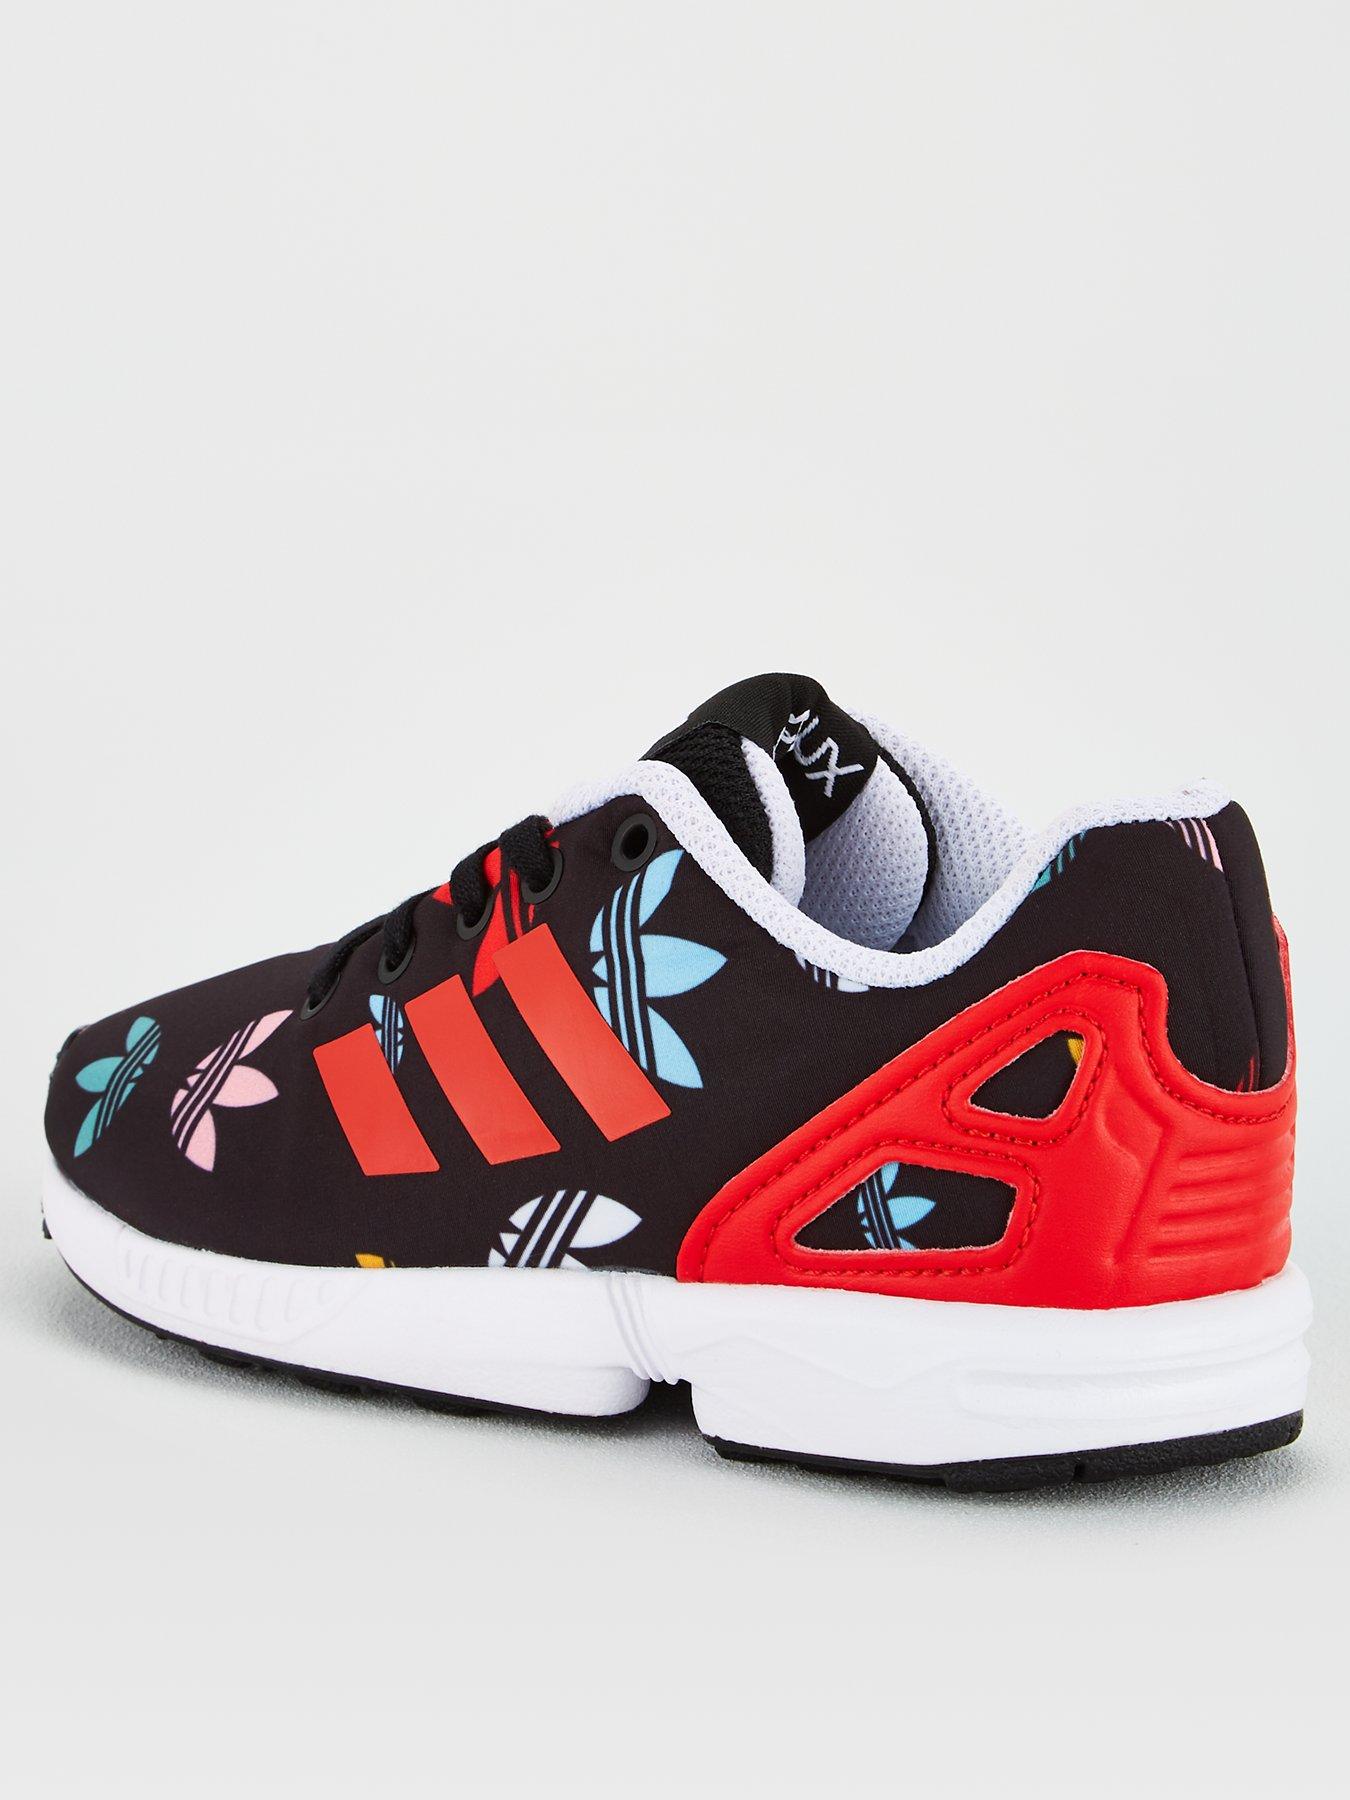 adidas flux childrens trainers